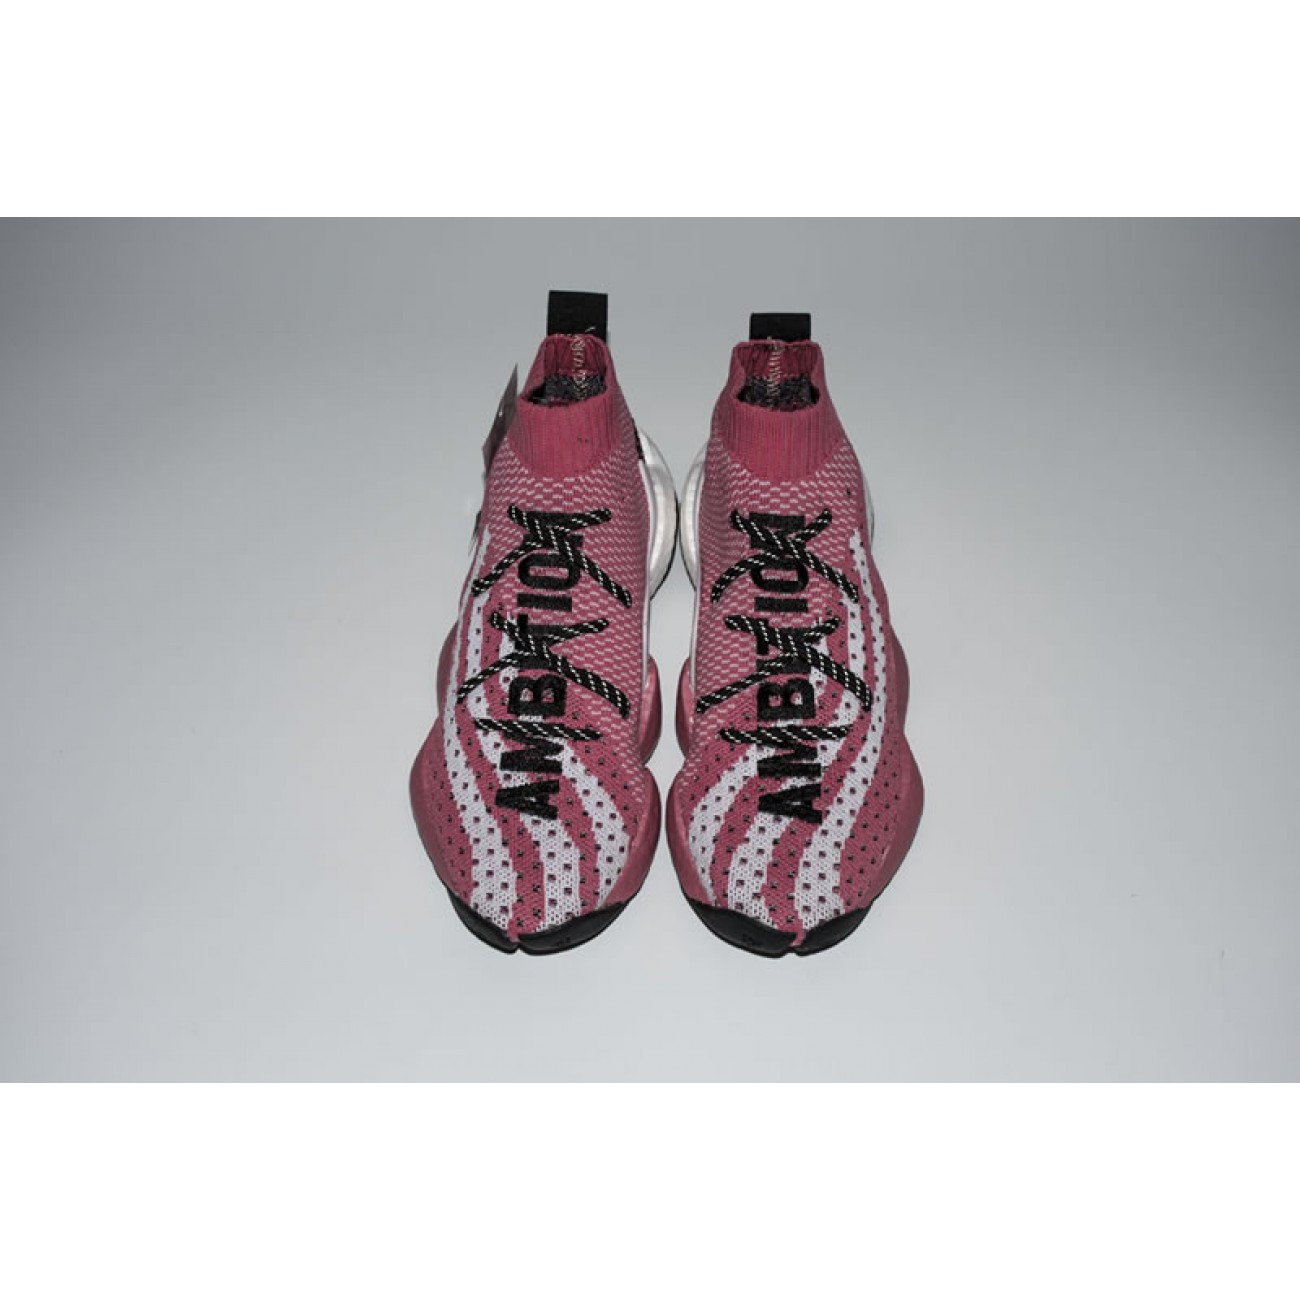 Pharrell Williams x adidas Crazy BYW "Solar Pink" / Chalk Pink Womens Size Basketball Shoes G28183